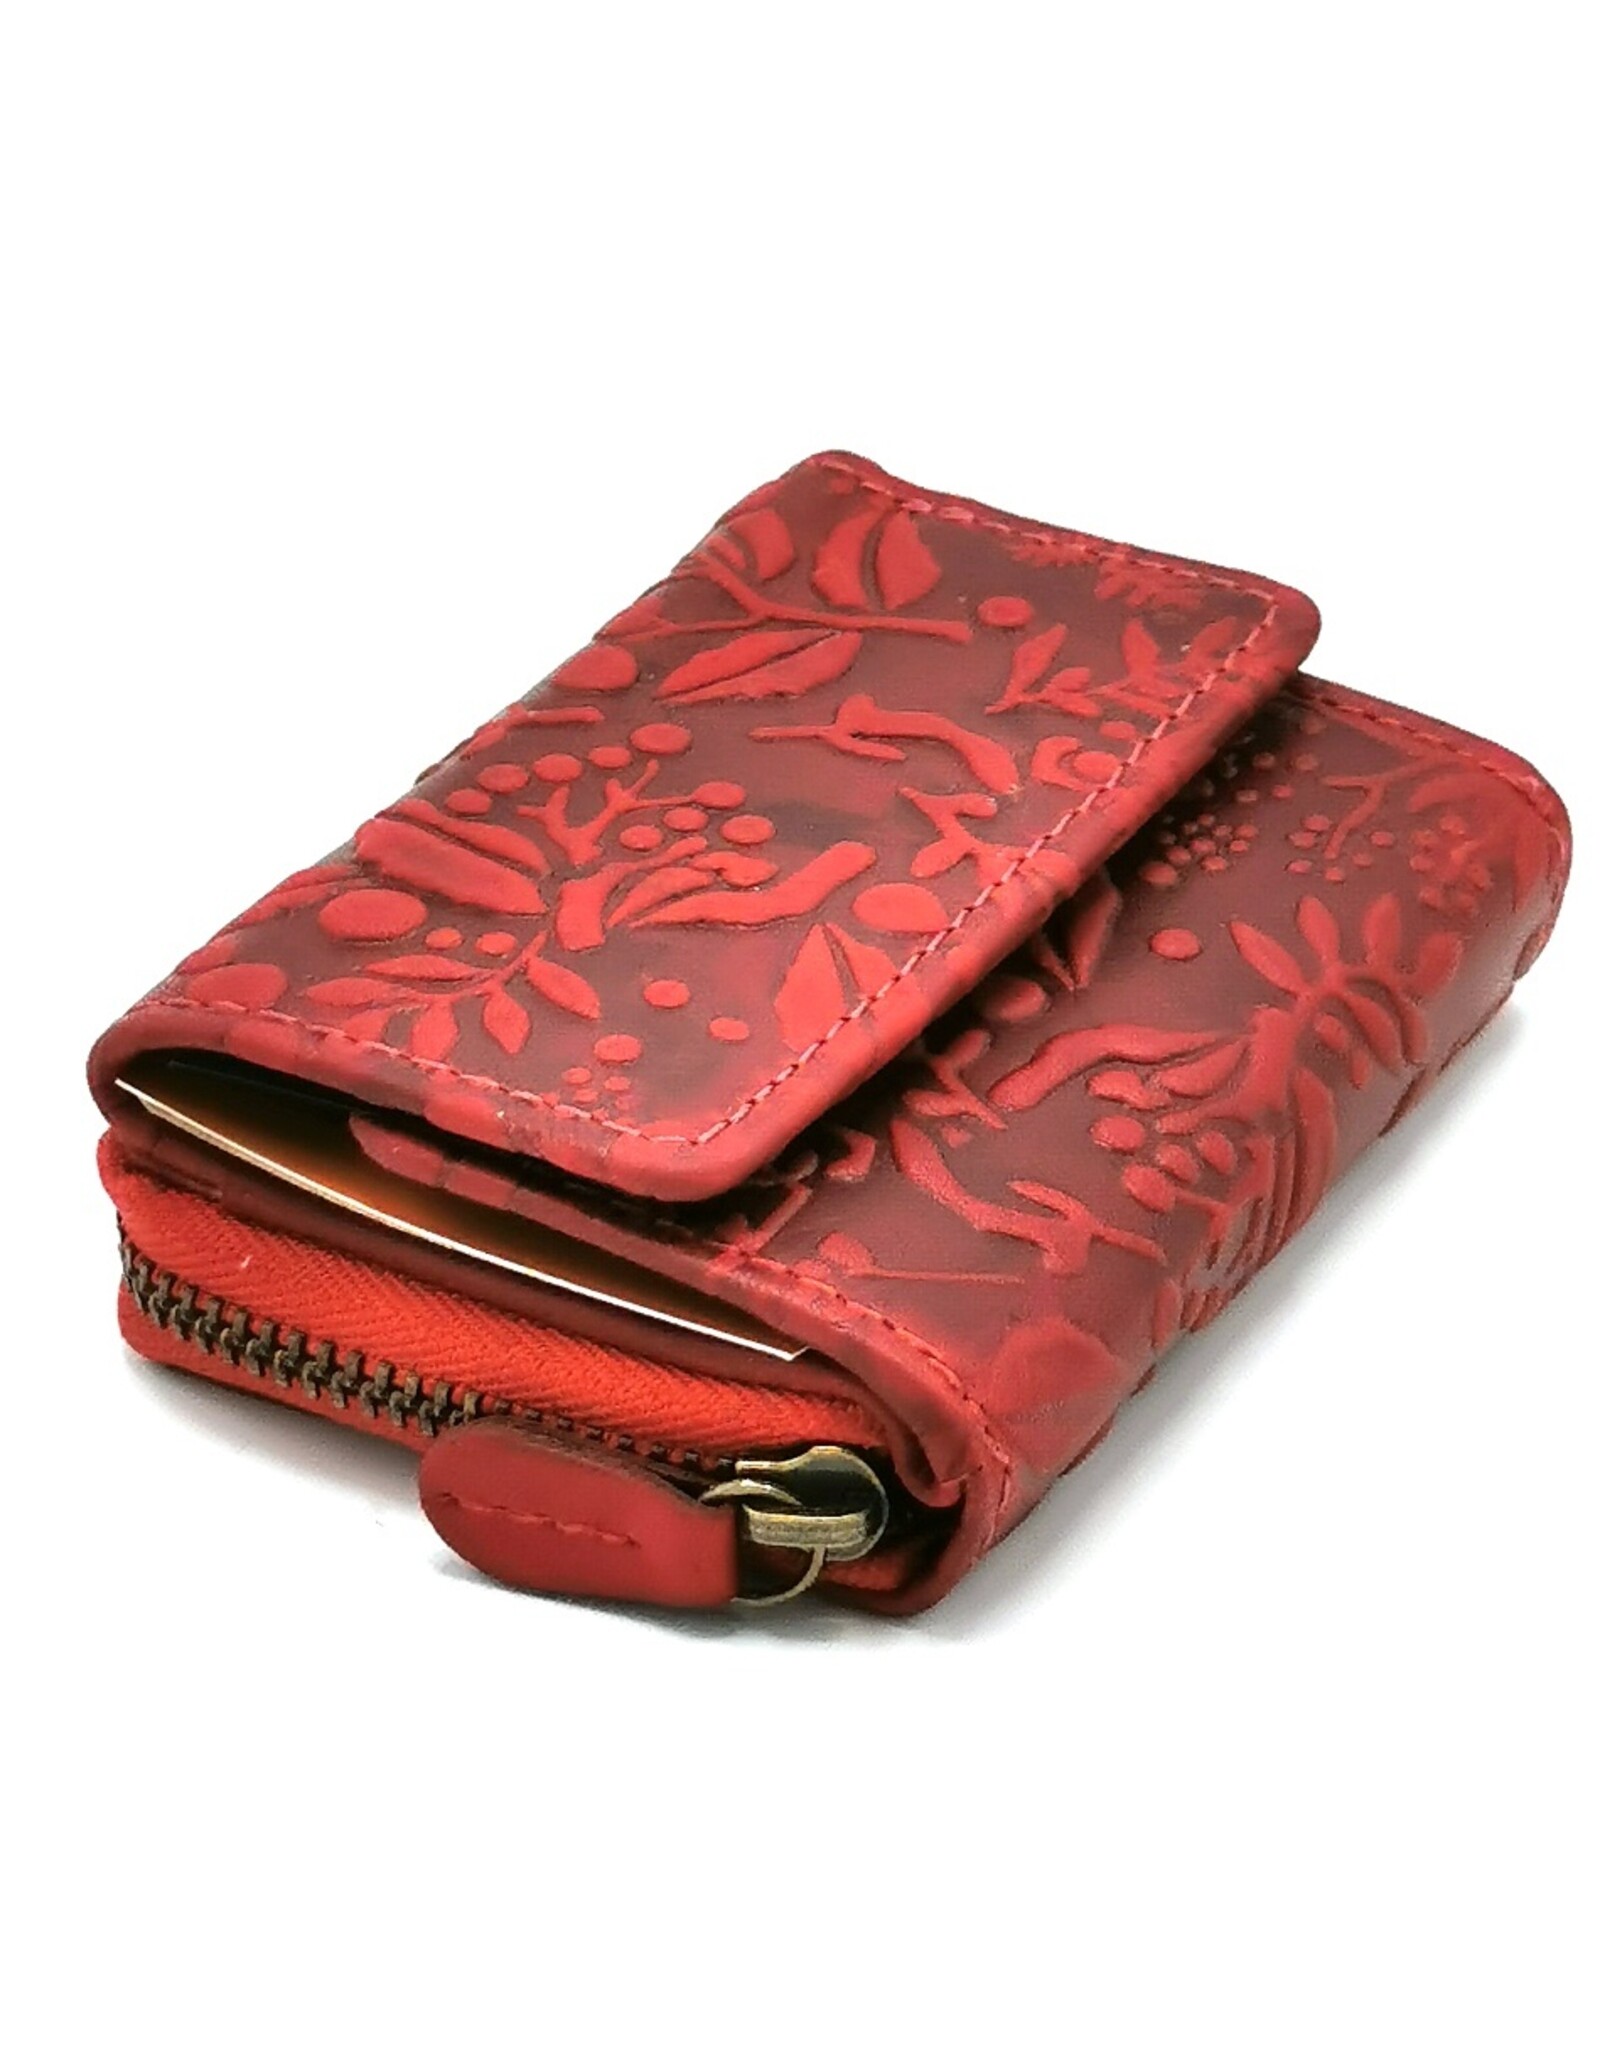 HillBurry Leather Wallets - Hillburry Leather mini wallet with embossed flowers